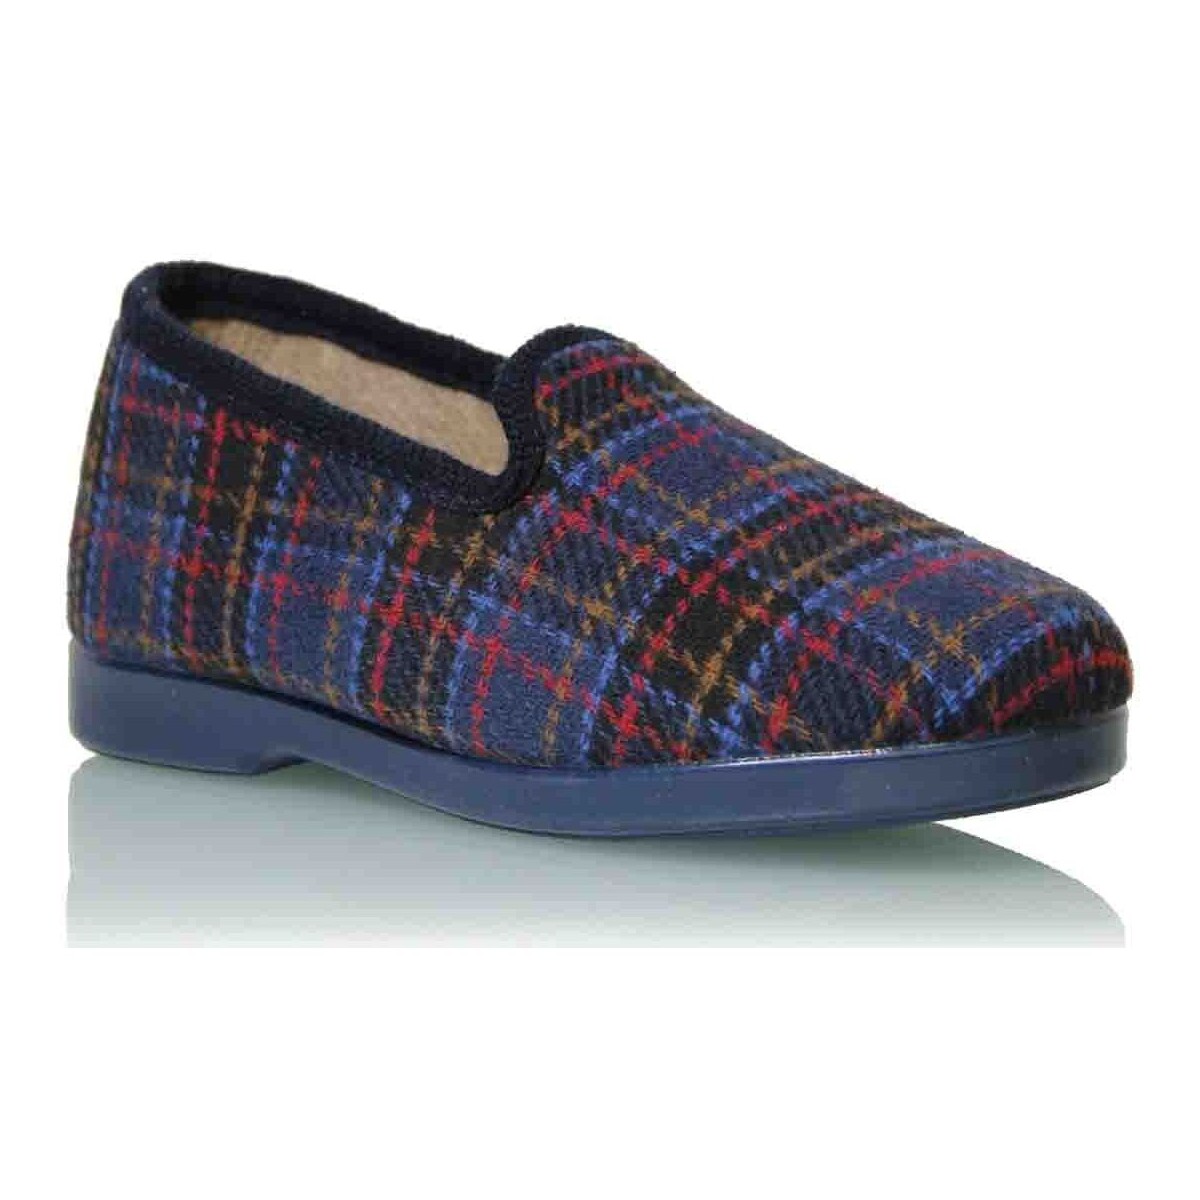 Chaussures Femme Chaussons Chapines 101 Bleu